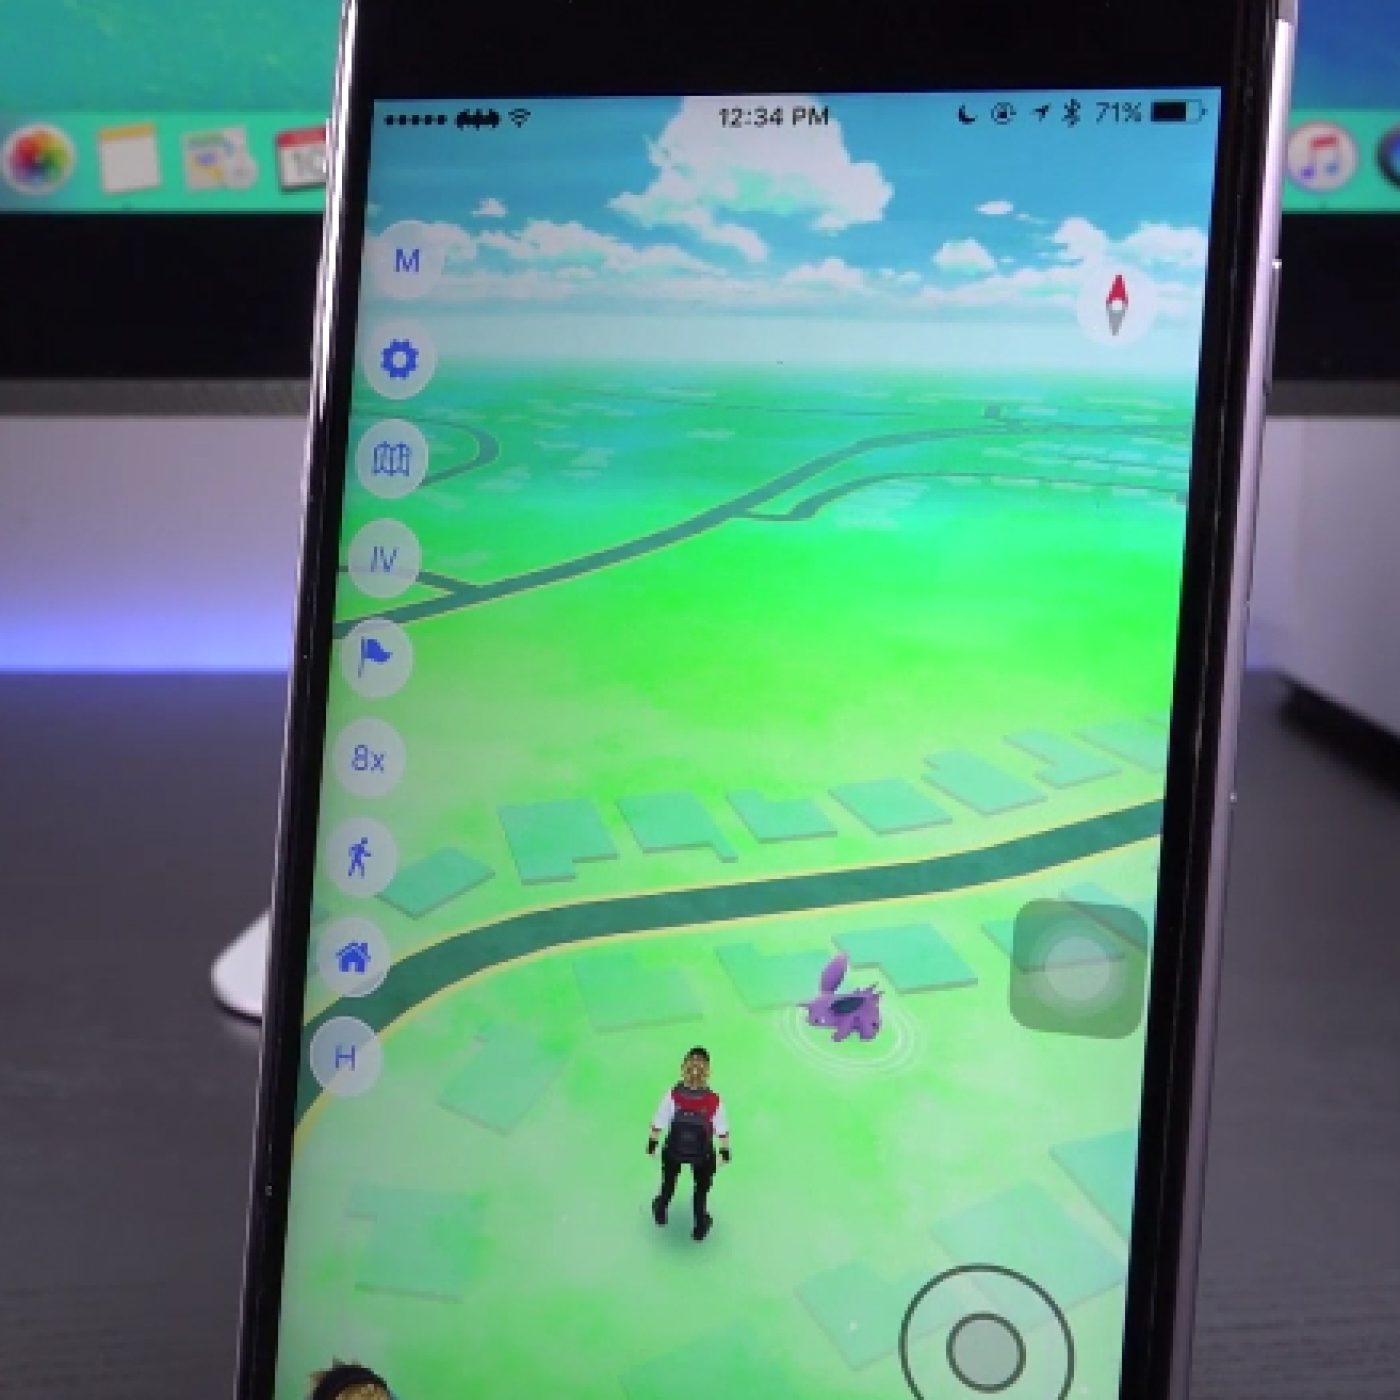 A pokemon go hack is a software that allows players to access hidden  features of the